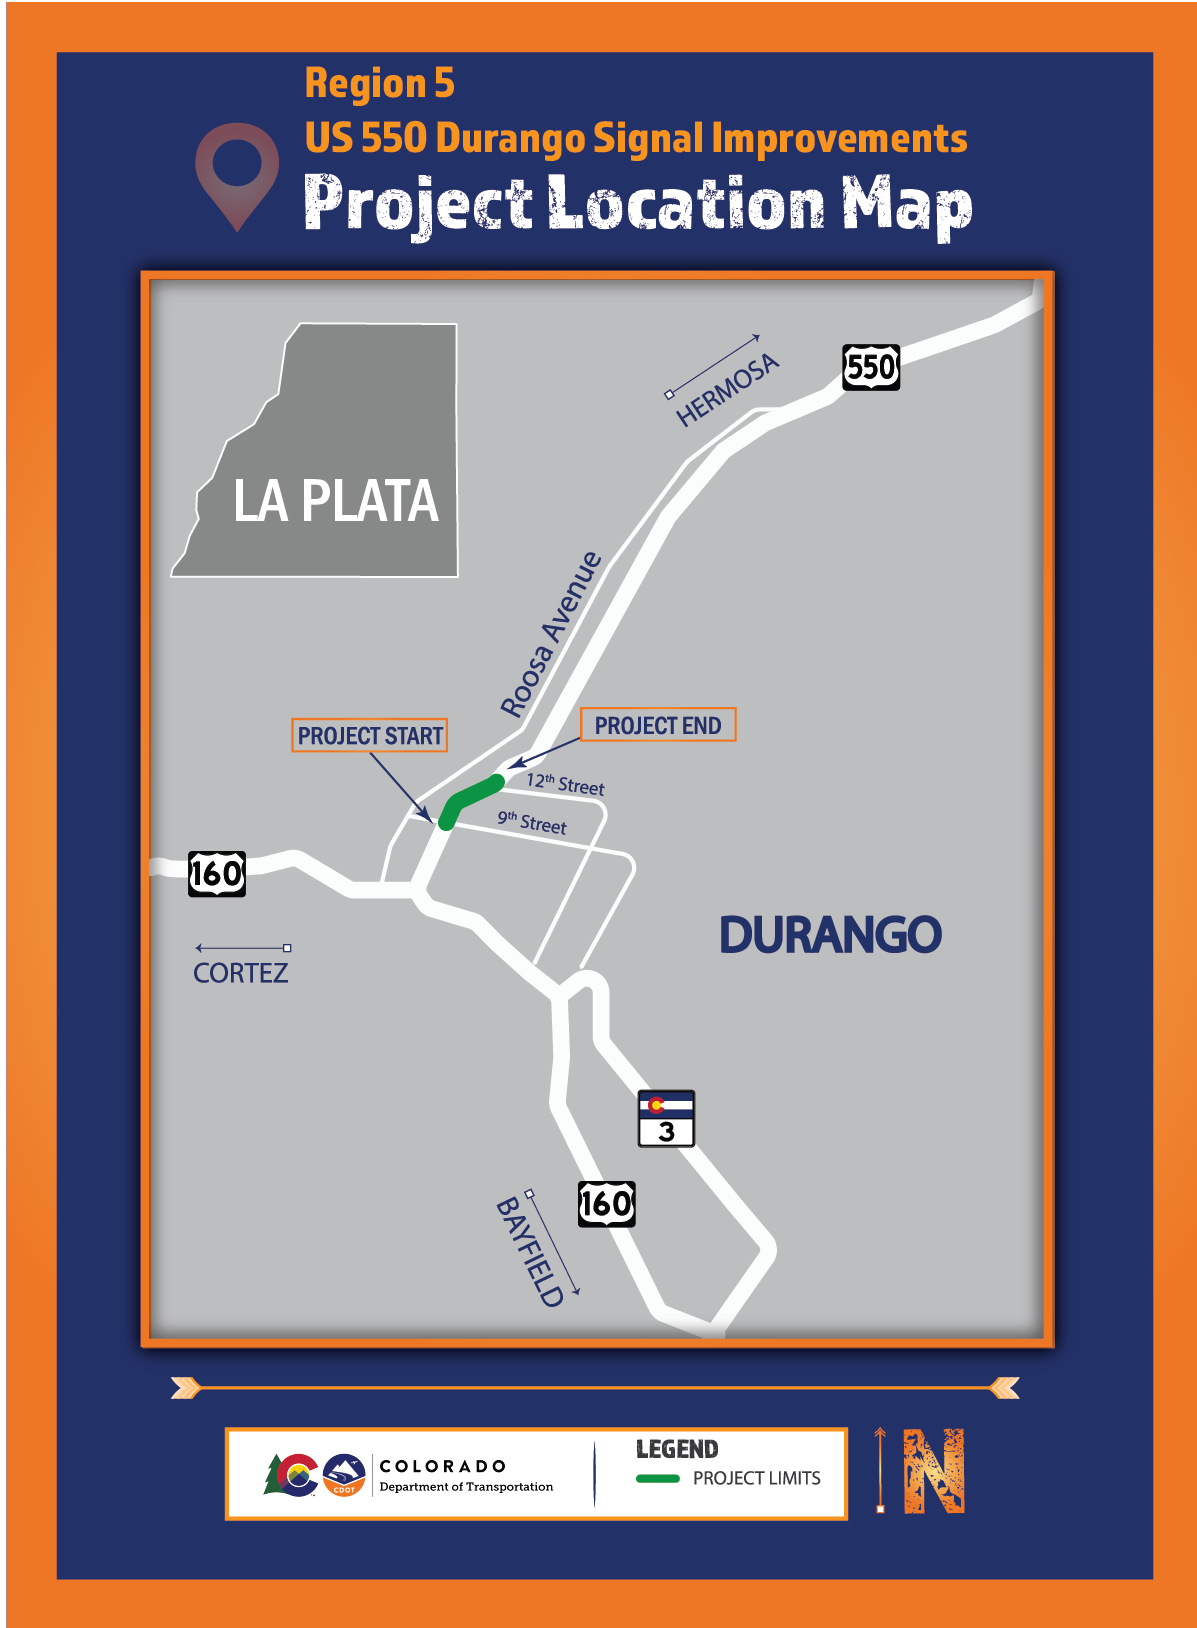 US 550 Project Location Map v1 6.9.2021-01.png detail image